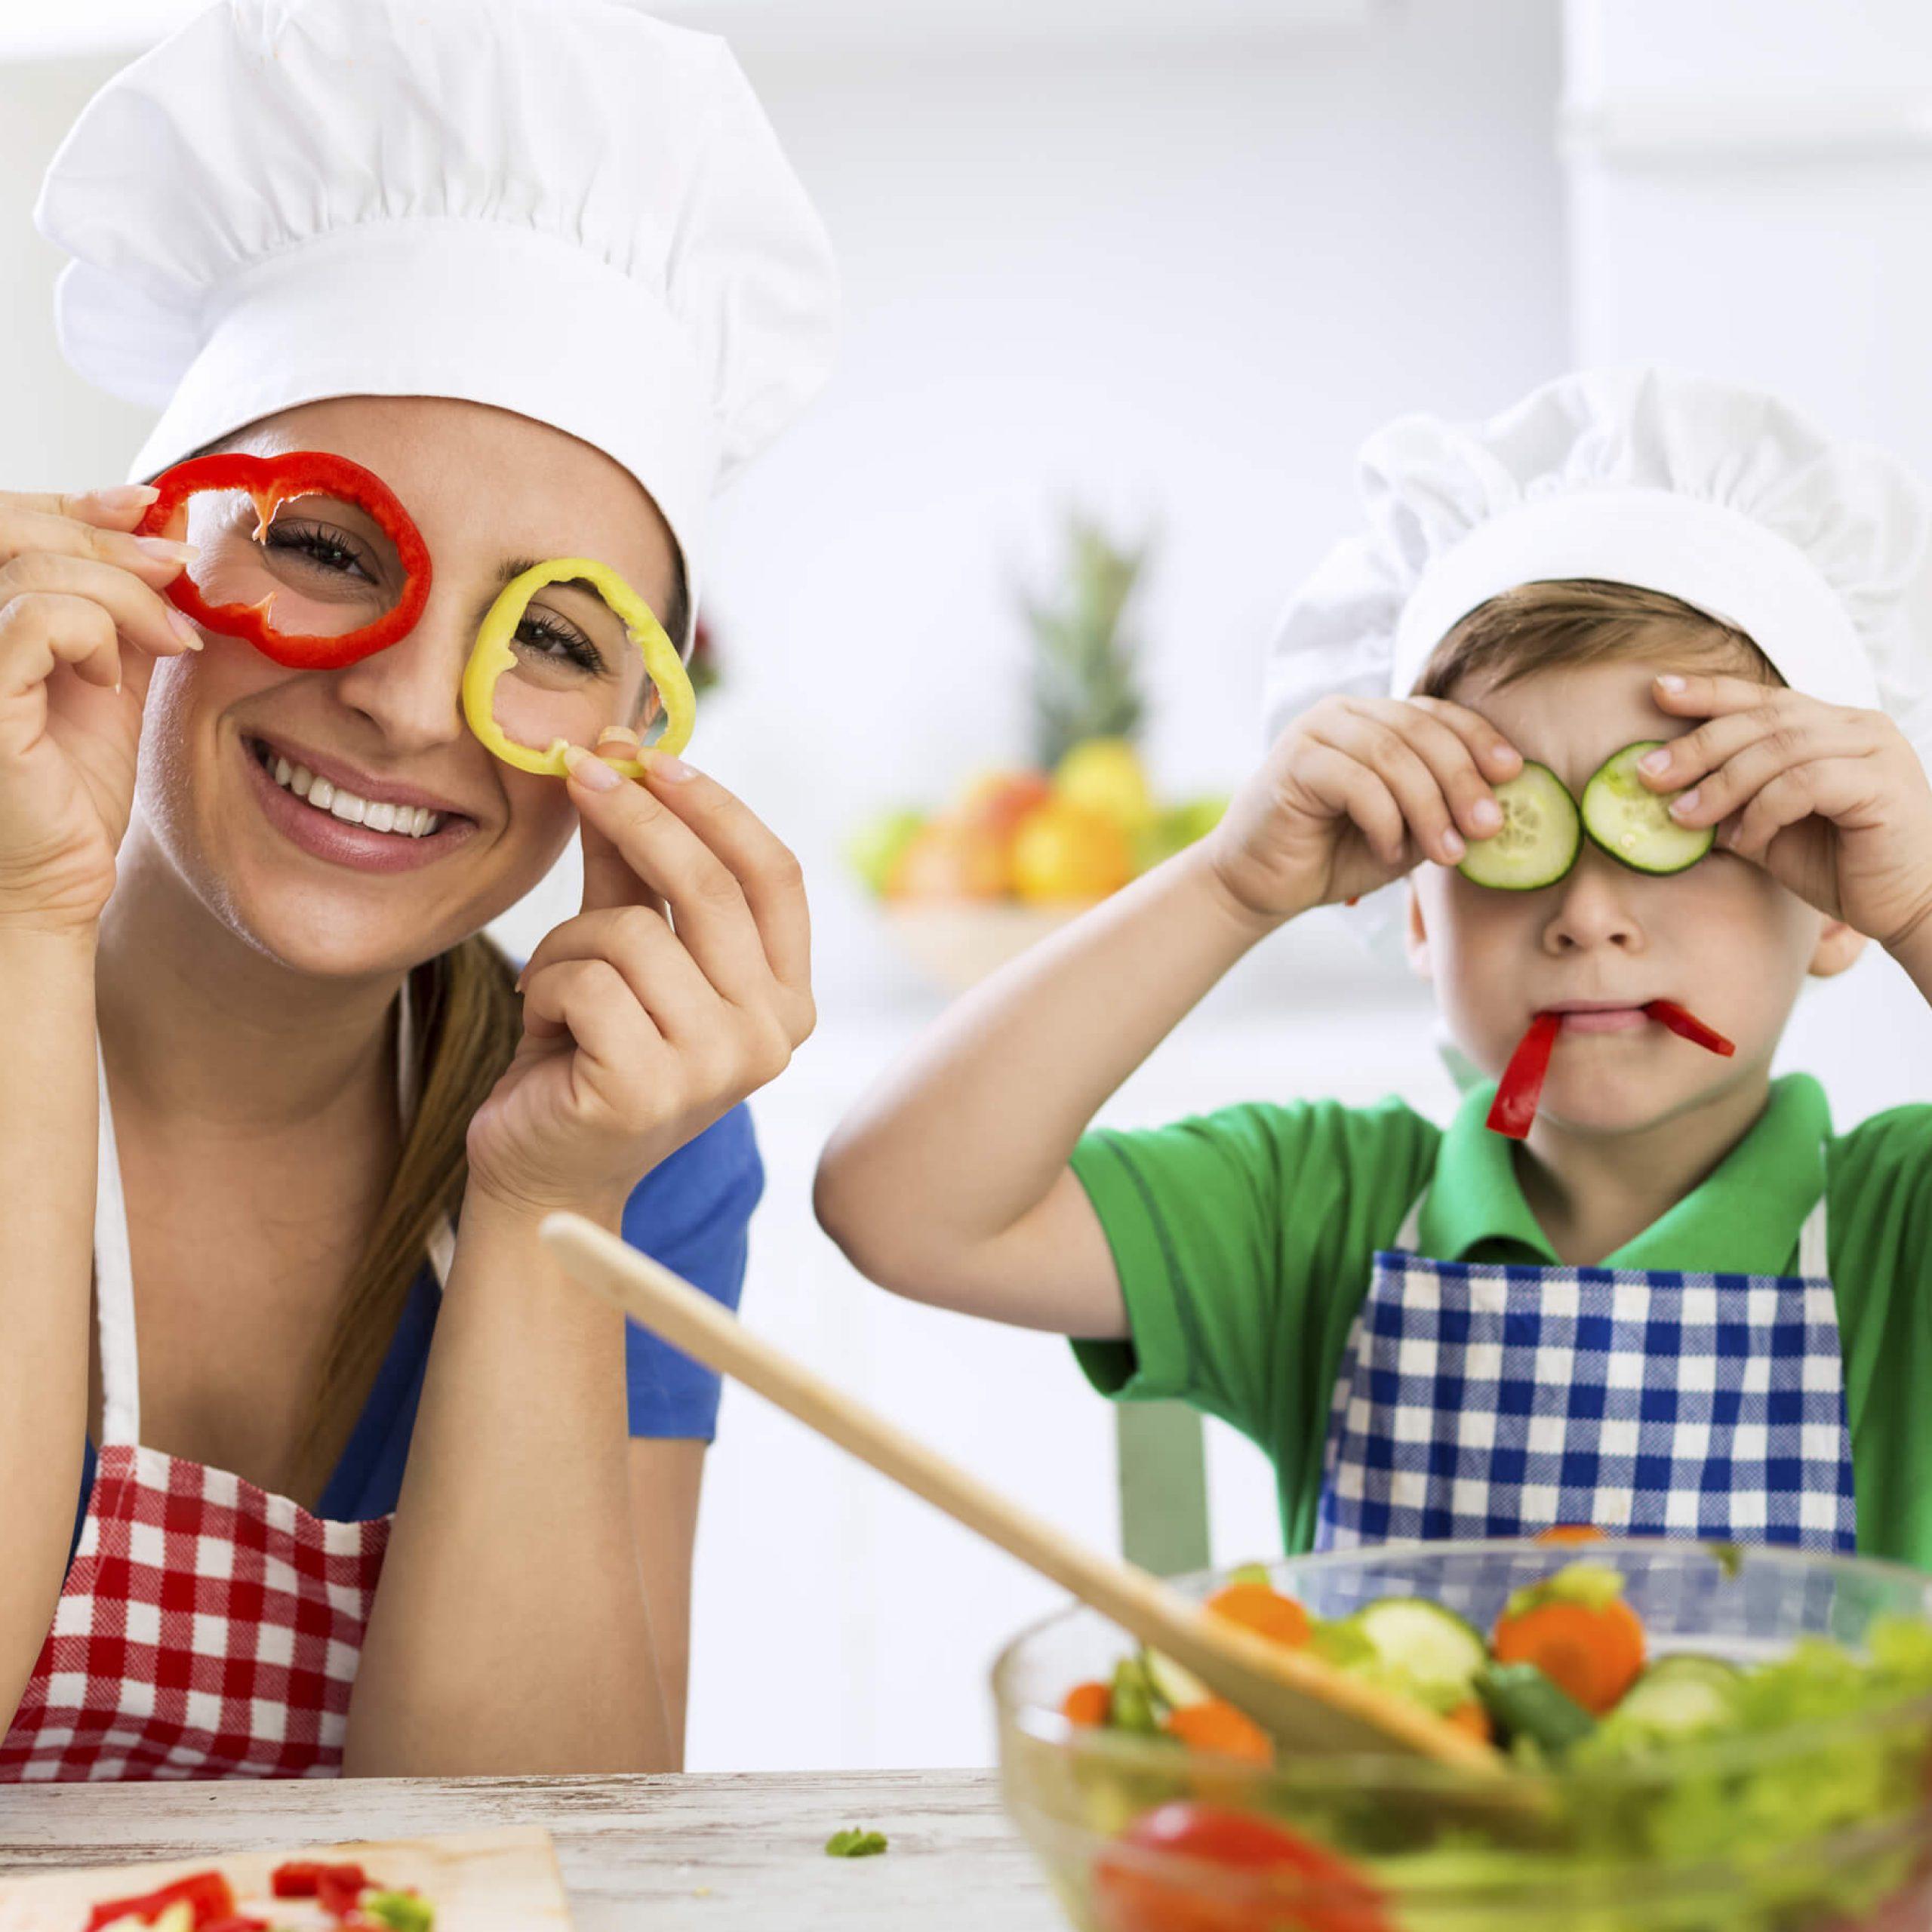 A joyful child enjoying a plate of colourful fruits and vegetables, showcasing the pleasure of kids' healthy eating.